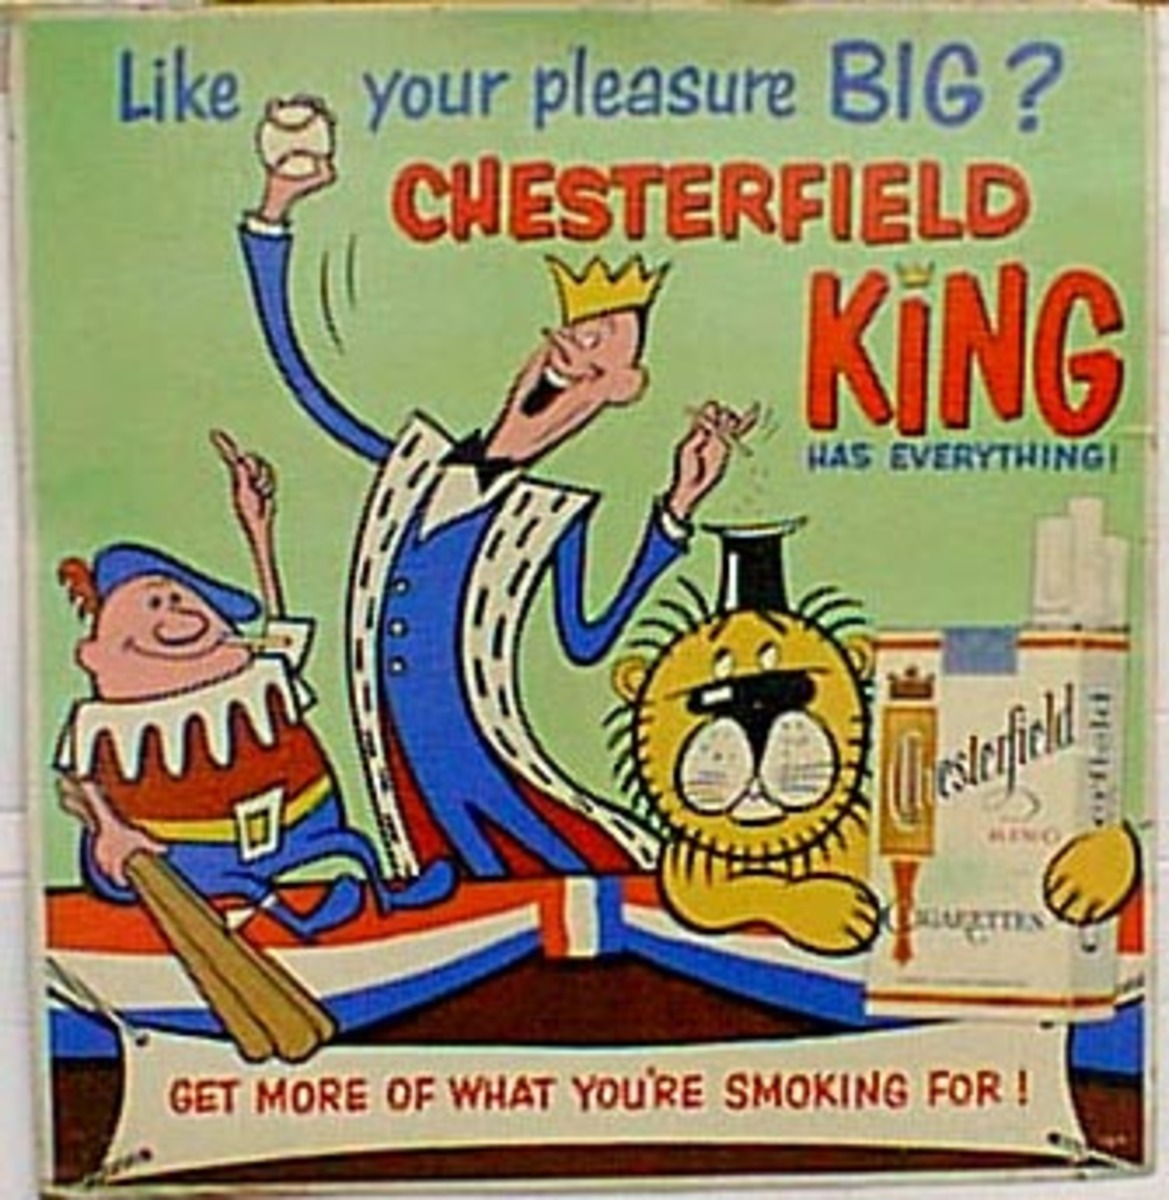 Original Chesterfield Cigarettes King Has Everything